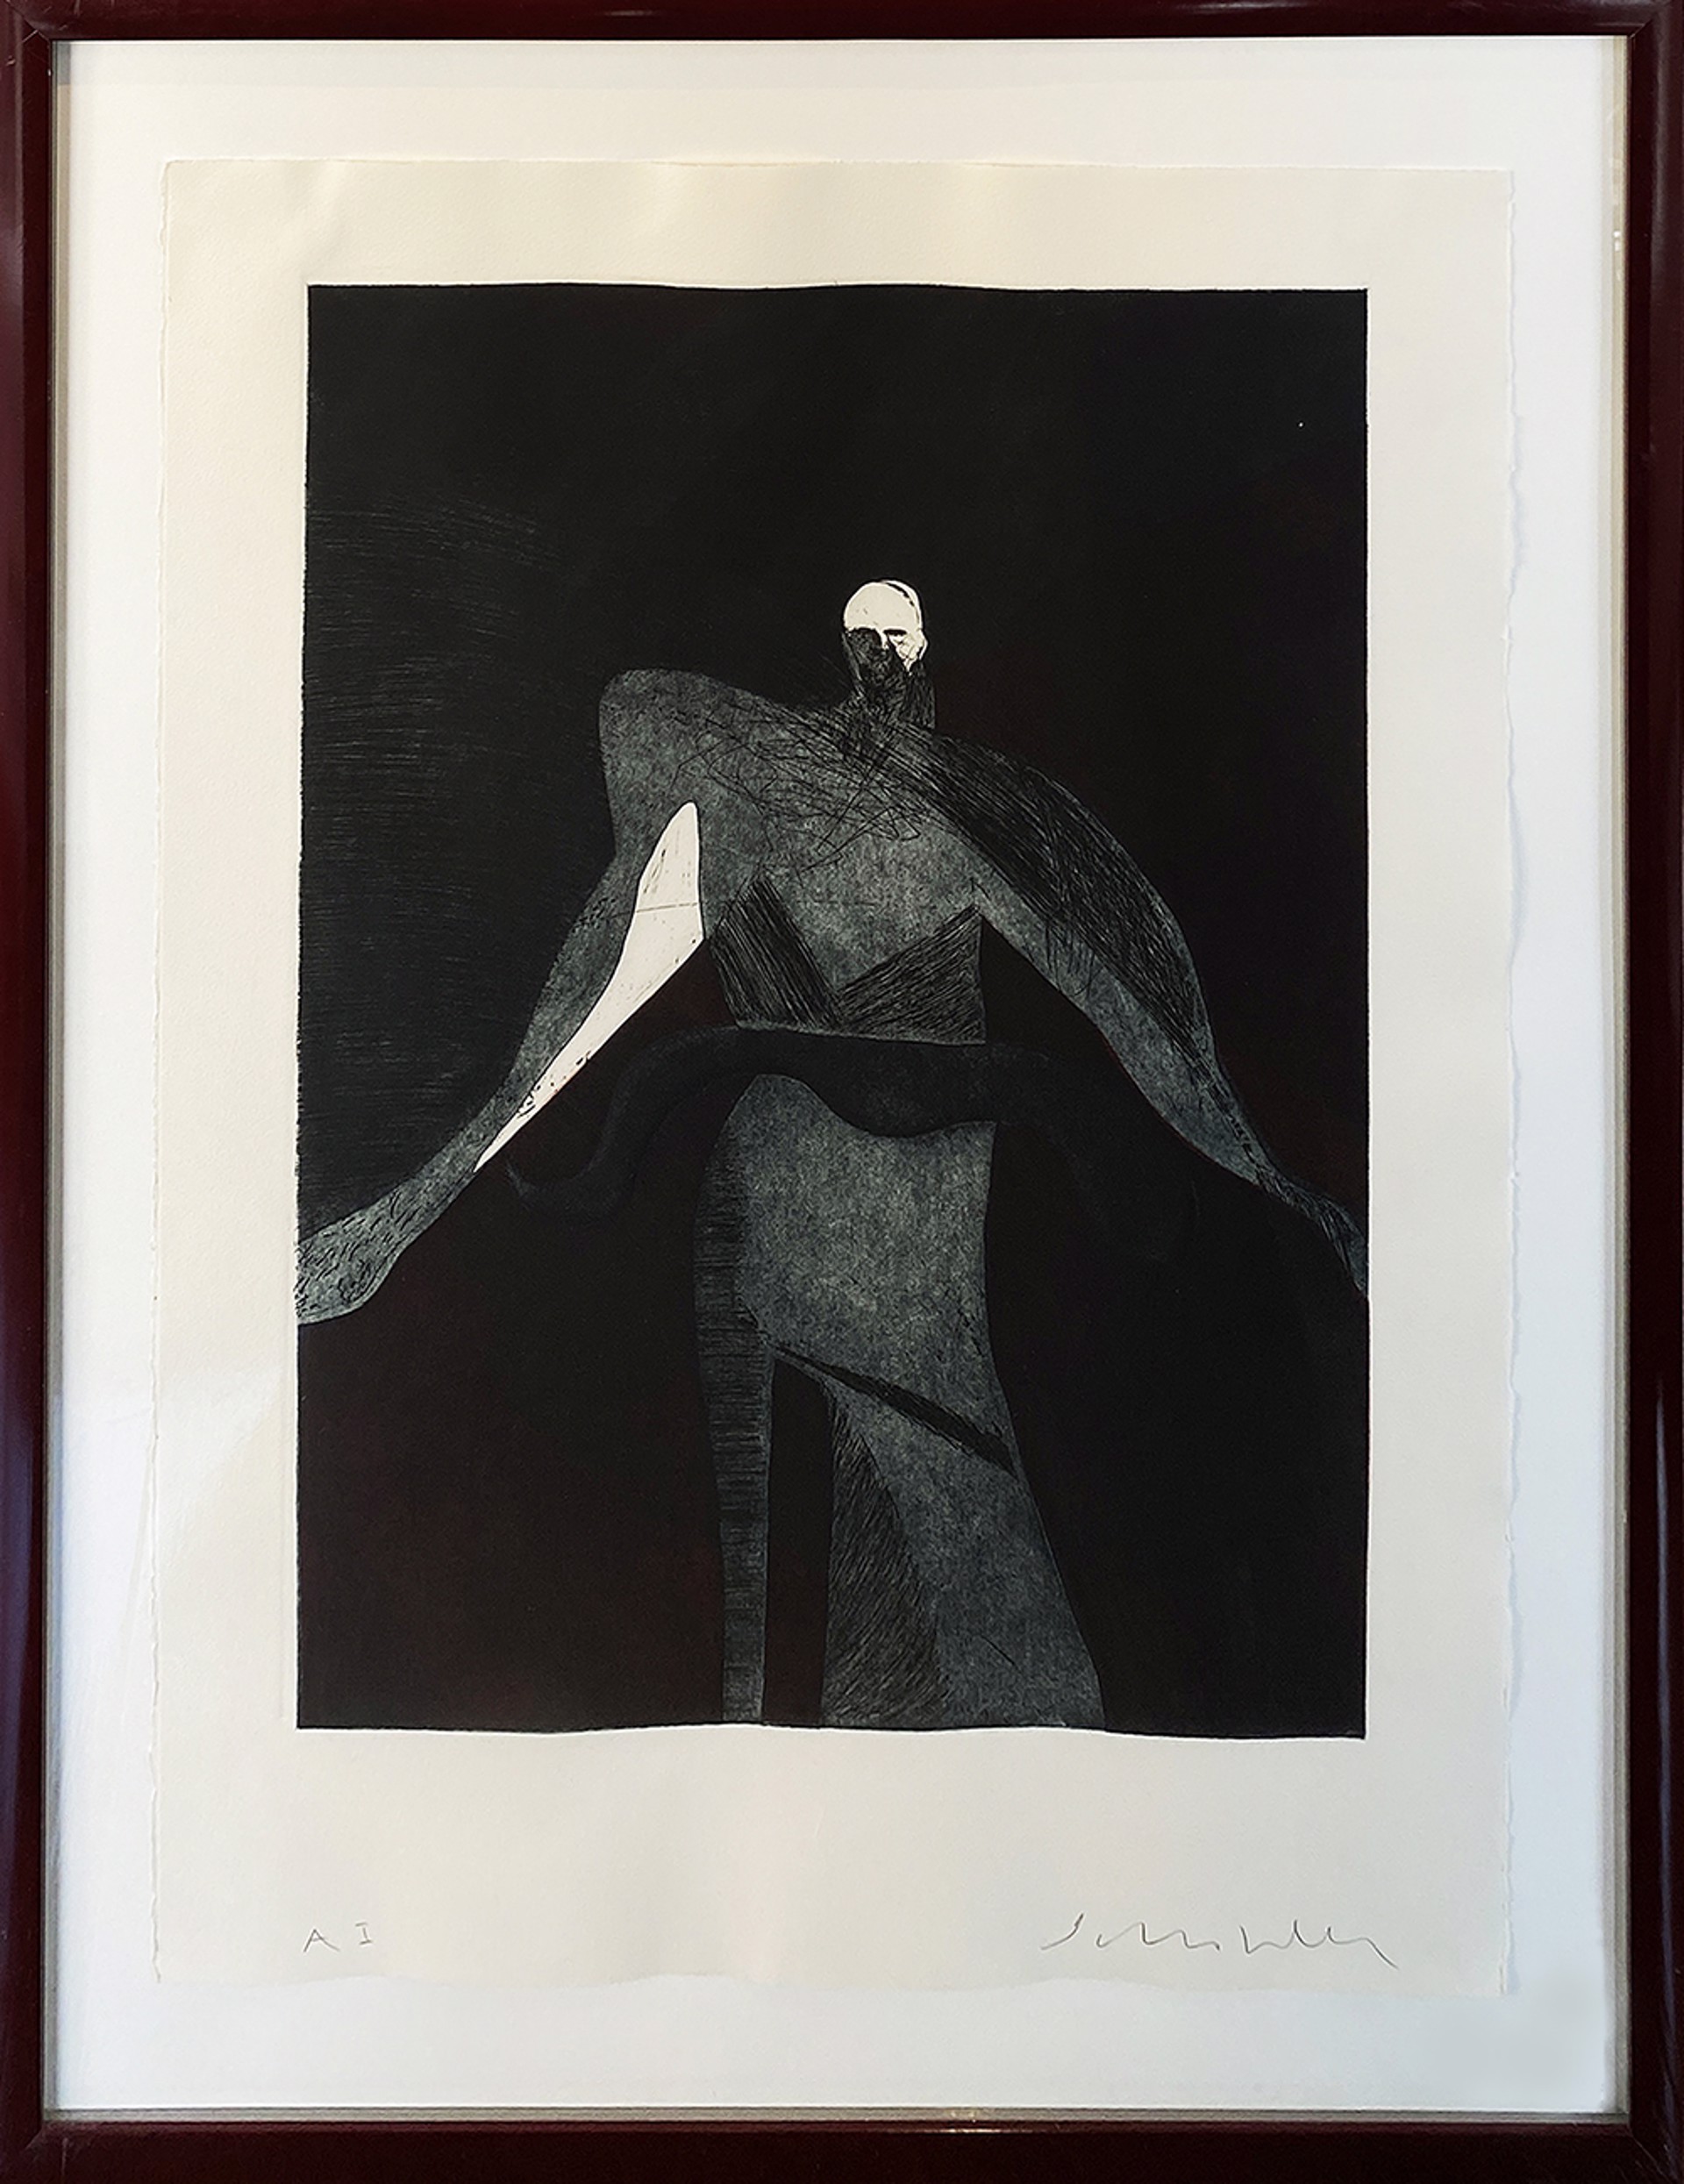 Reflections #1 by Fritz Scholder